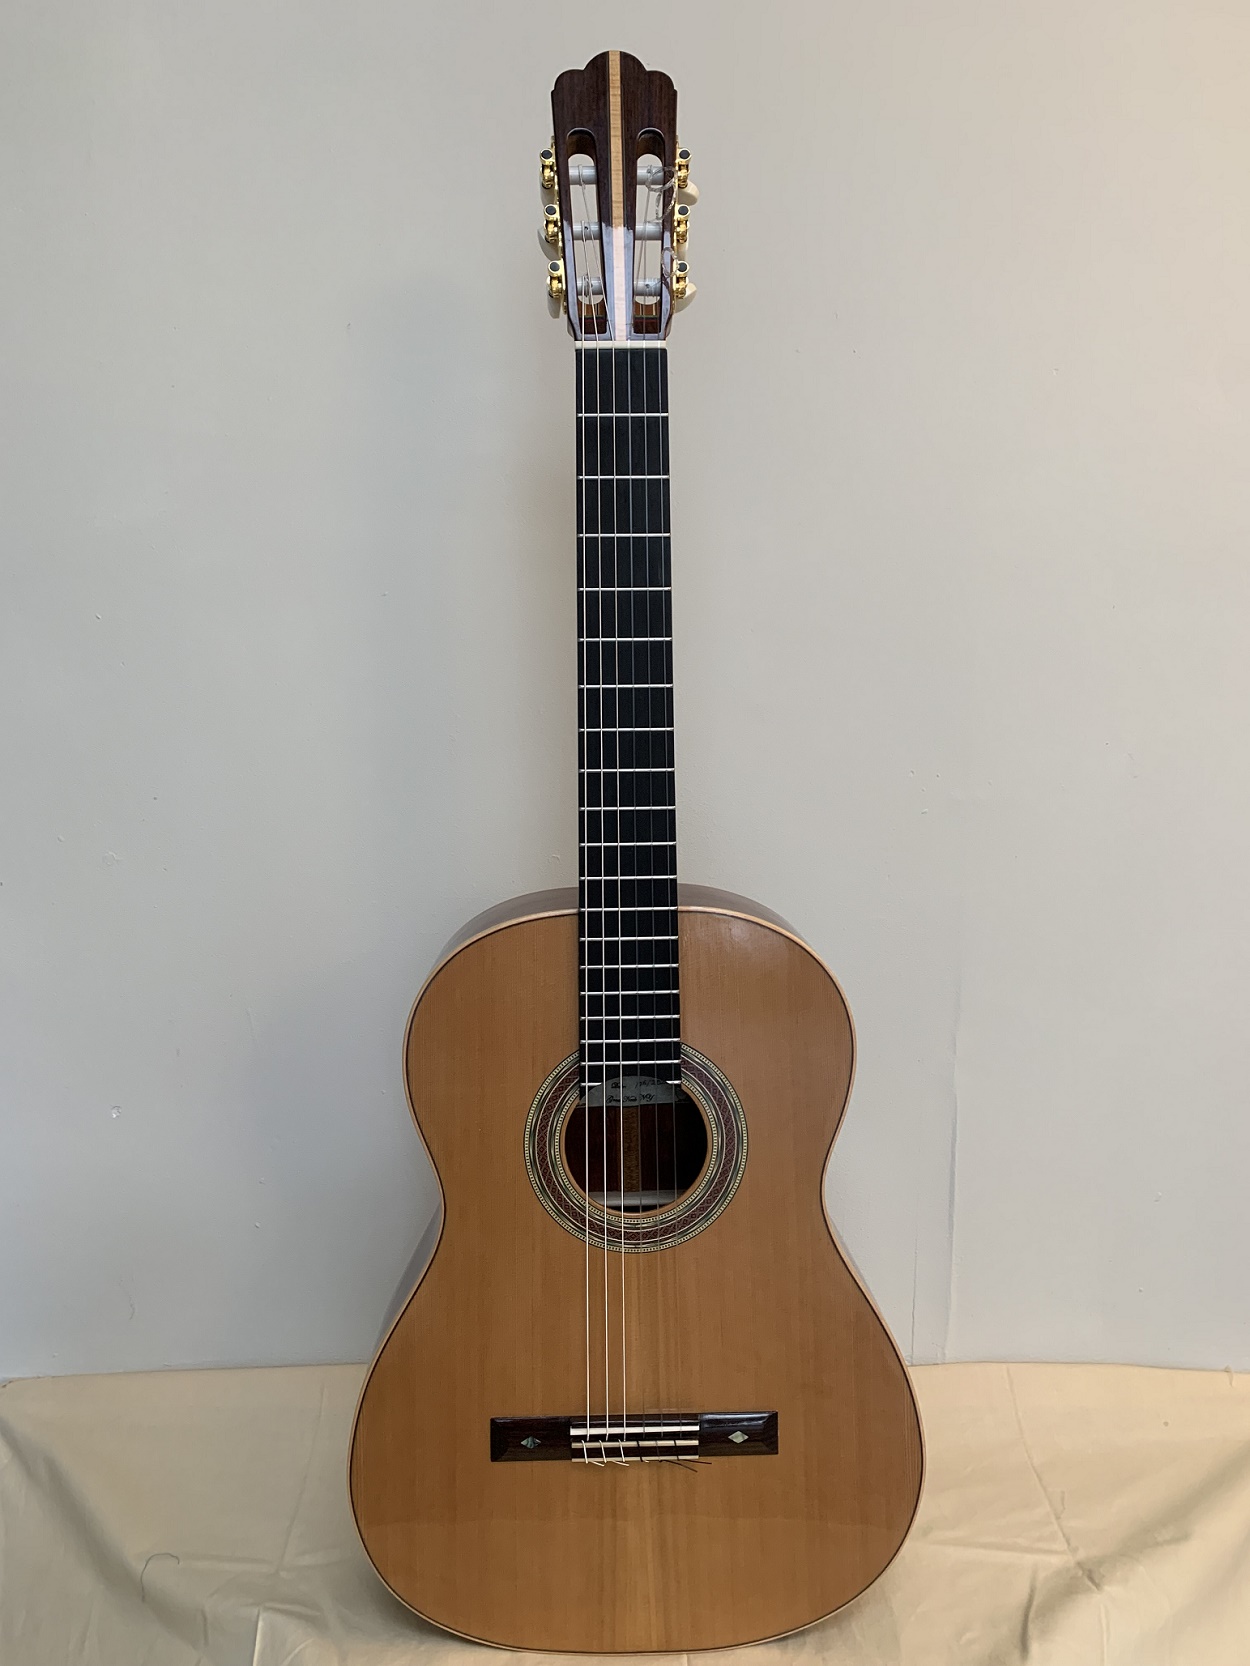 A concert classical guitar build with Cedar and Bubinga back and sides Torres and Romanillos